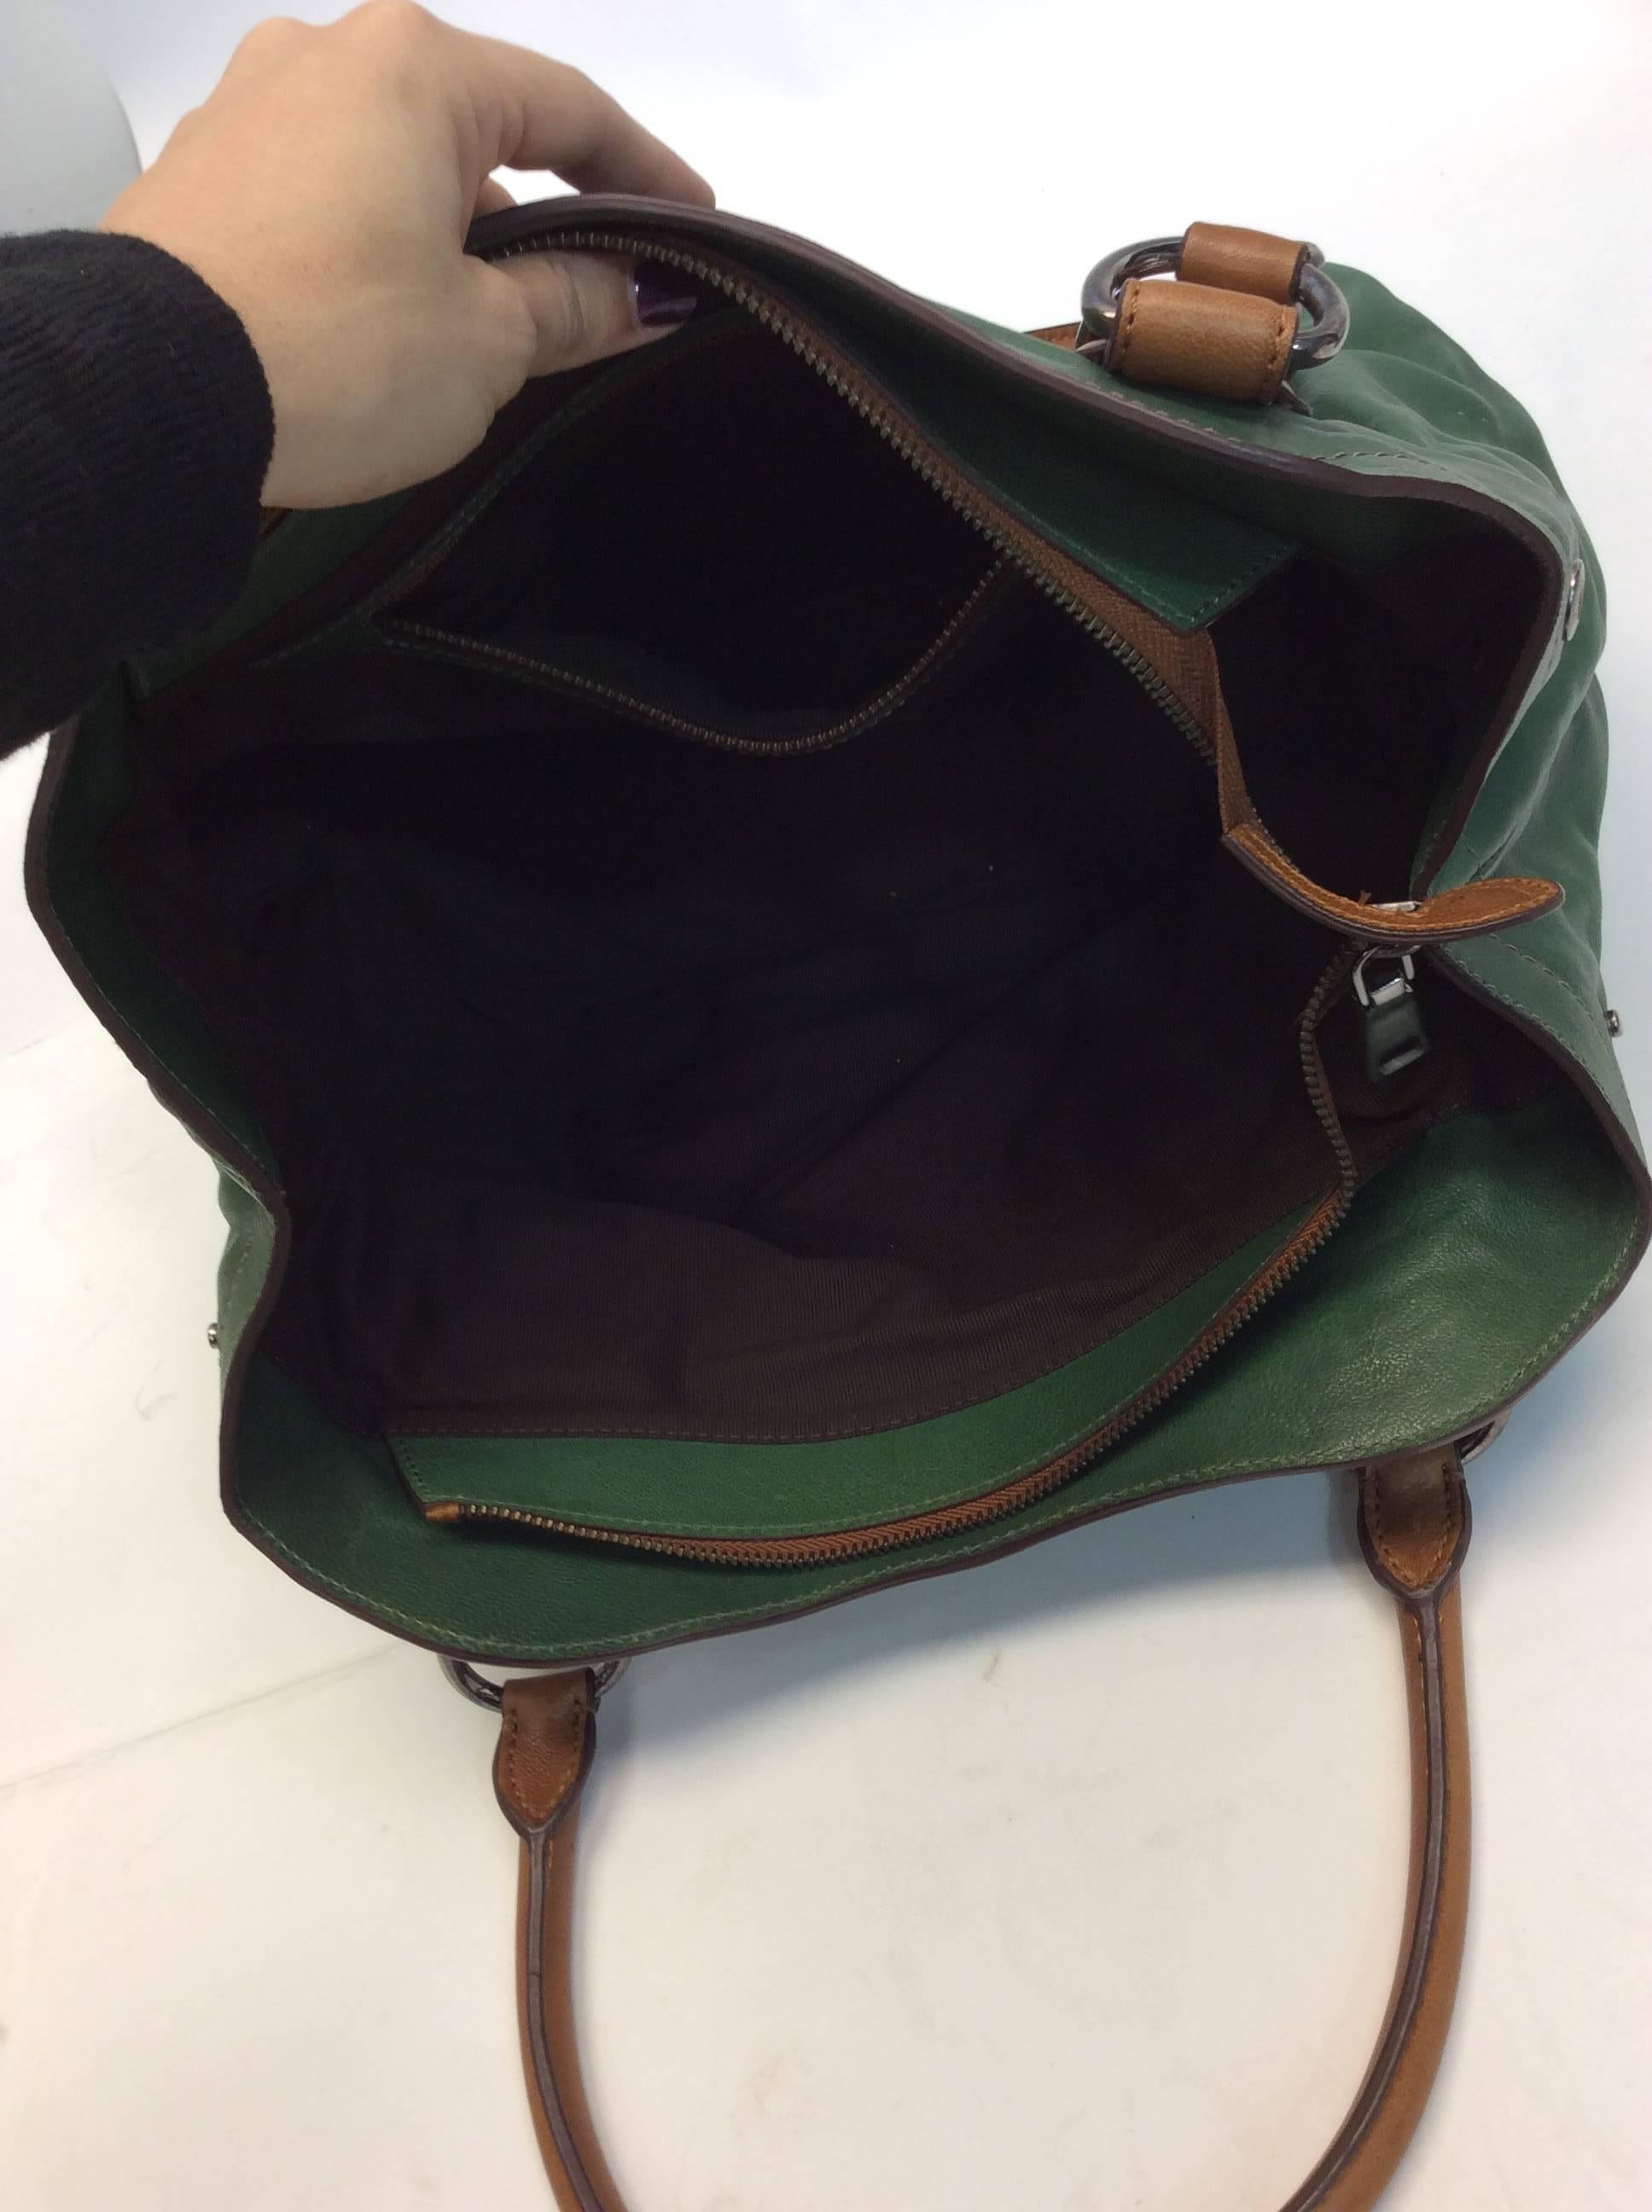 Prada Olive Green Leather Tote In Excellent Condition For Sale In Narberth, PA